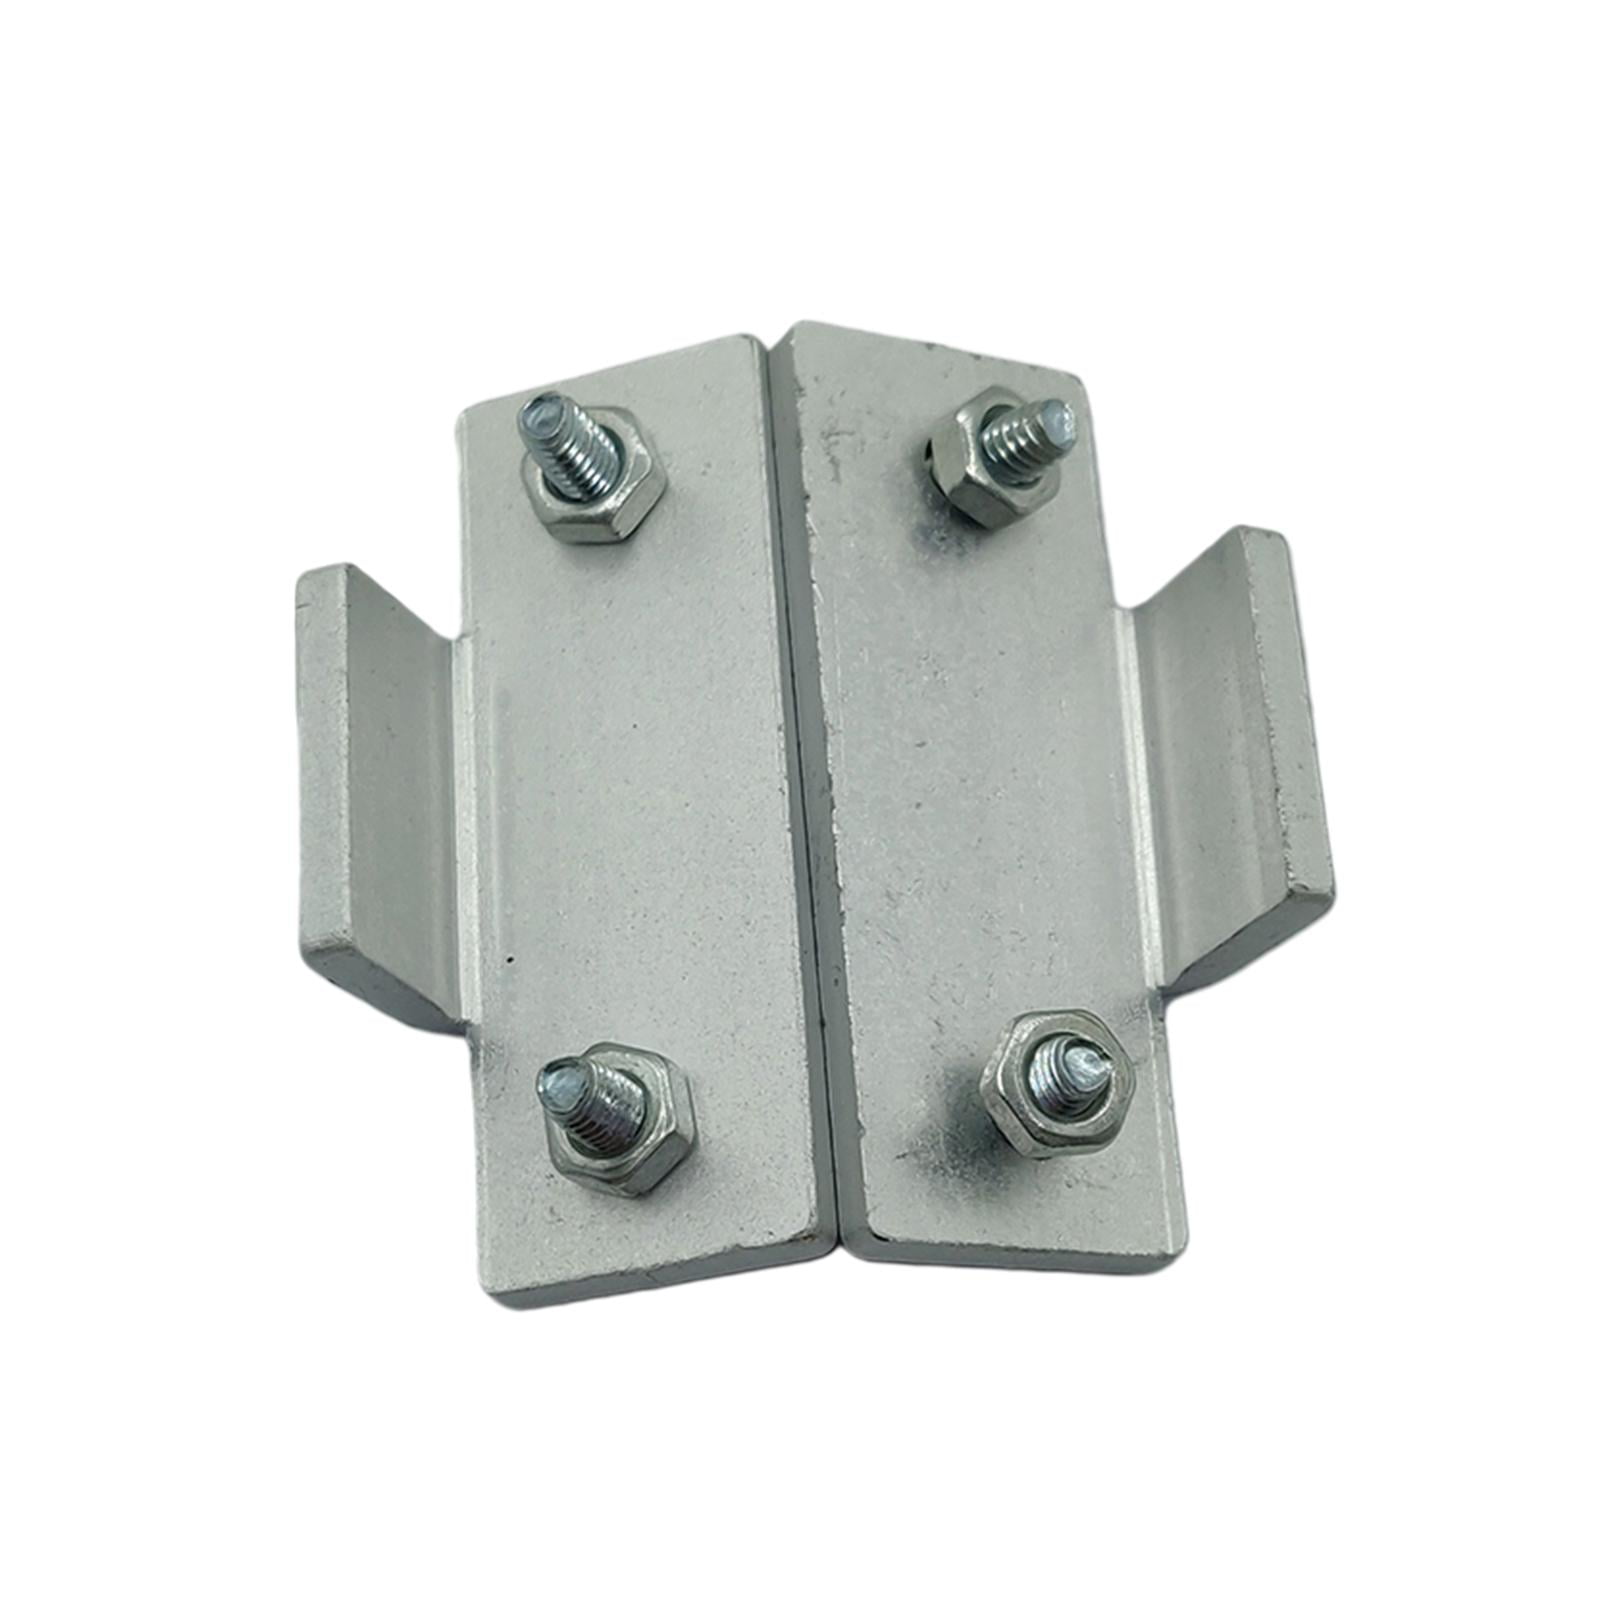 Durable Player Repair Hinge Set Accessories,Replacement for Technics SLD2 3200,B2 Q2 D3 Dustproof Covers Supplies, 